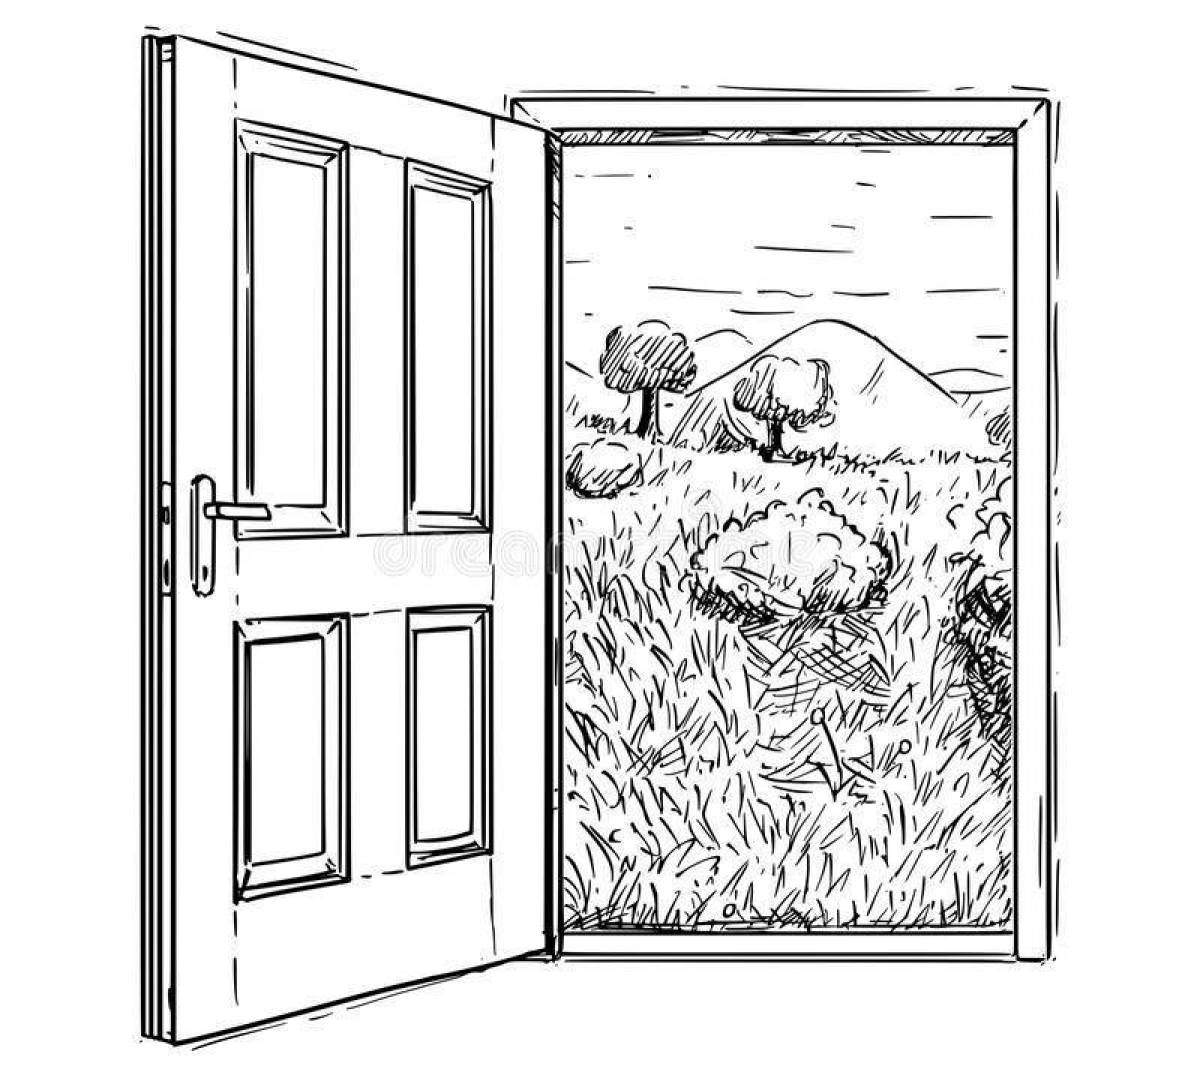 A wild knock on my door coloring page